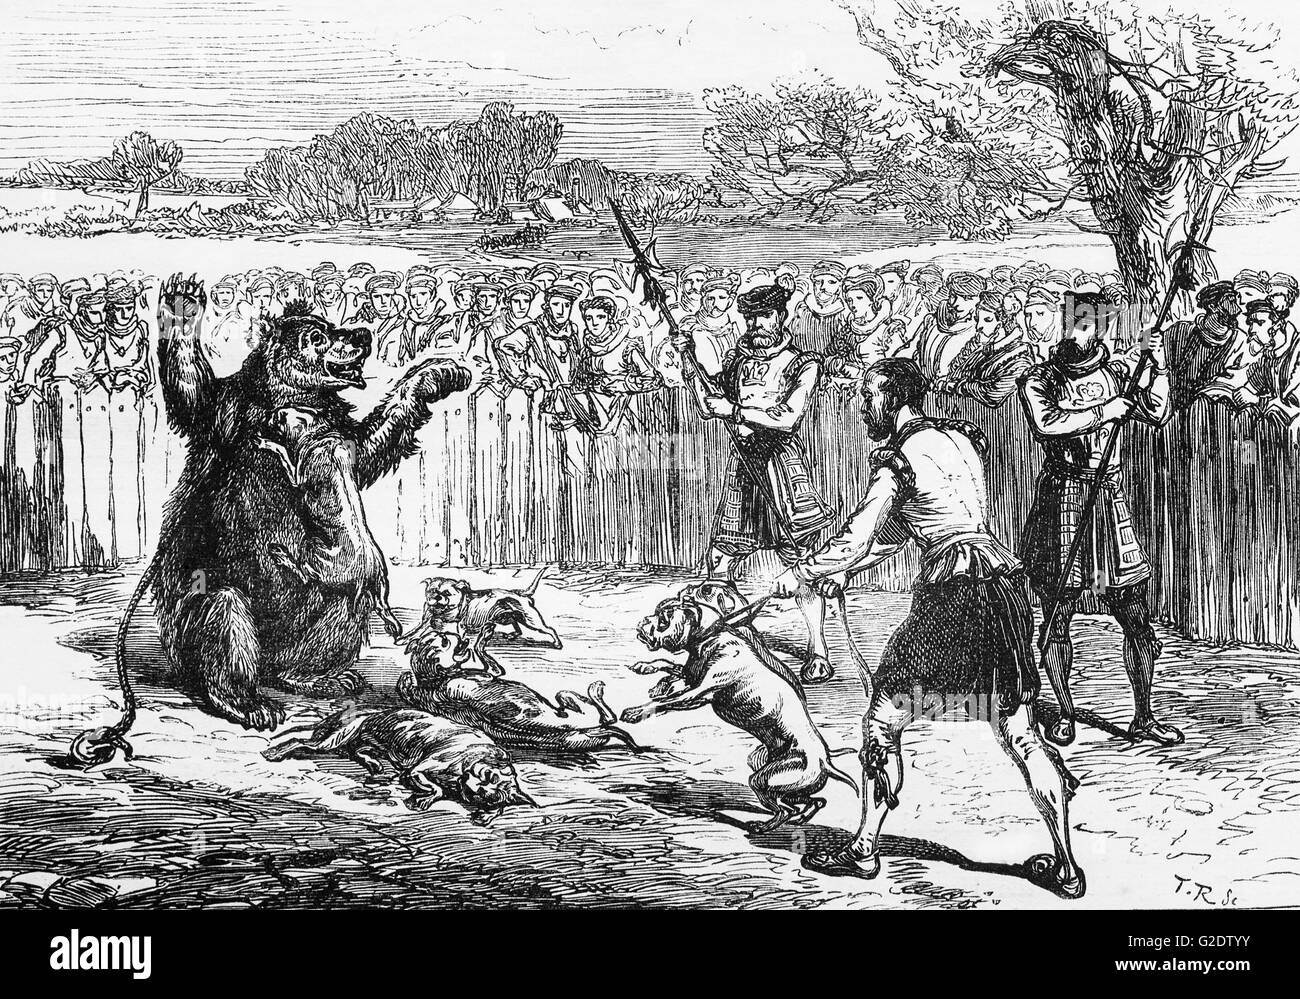 Bear Baiting during the time of Queen Elizabeth I: around 1575 Stock Photo